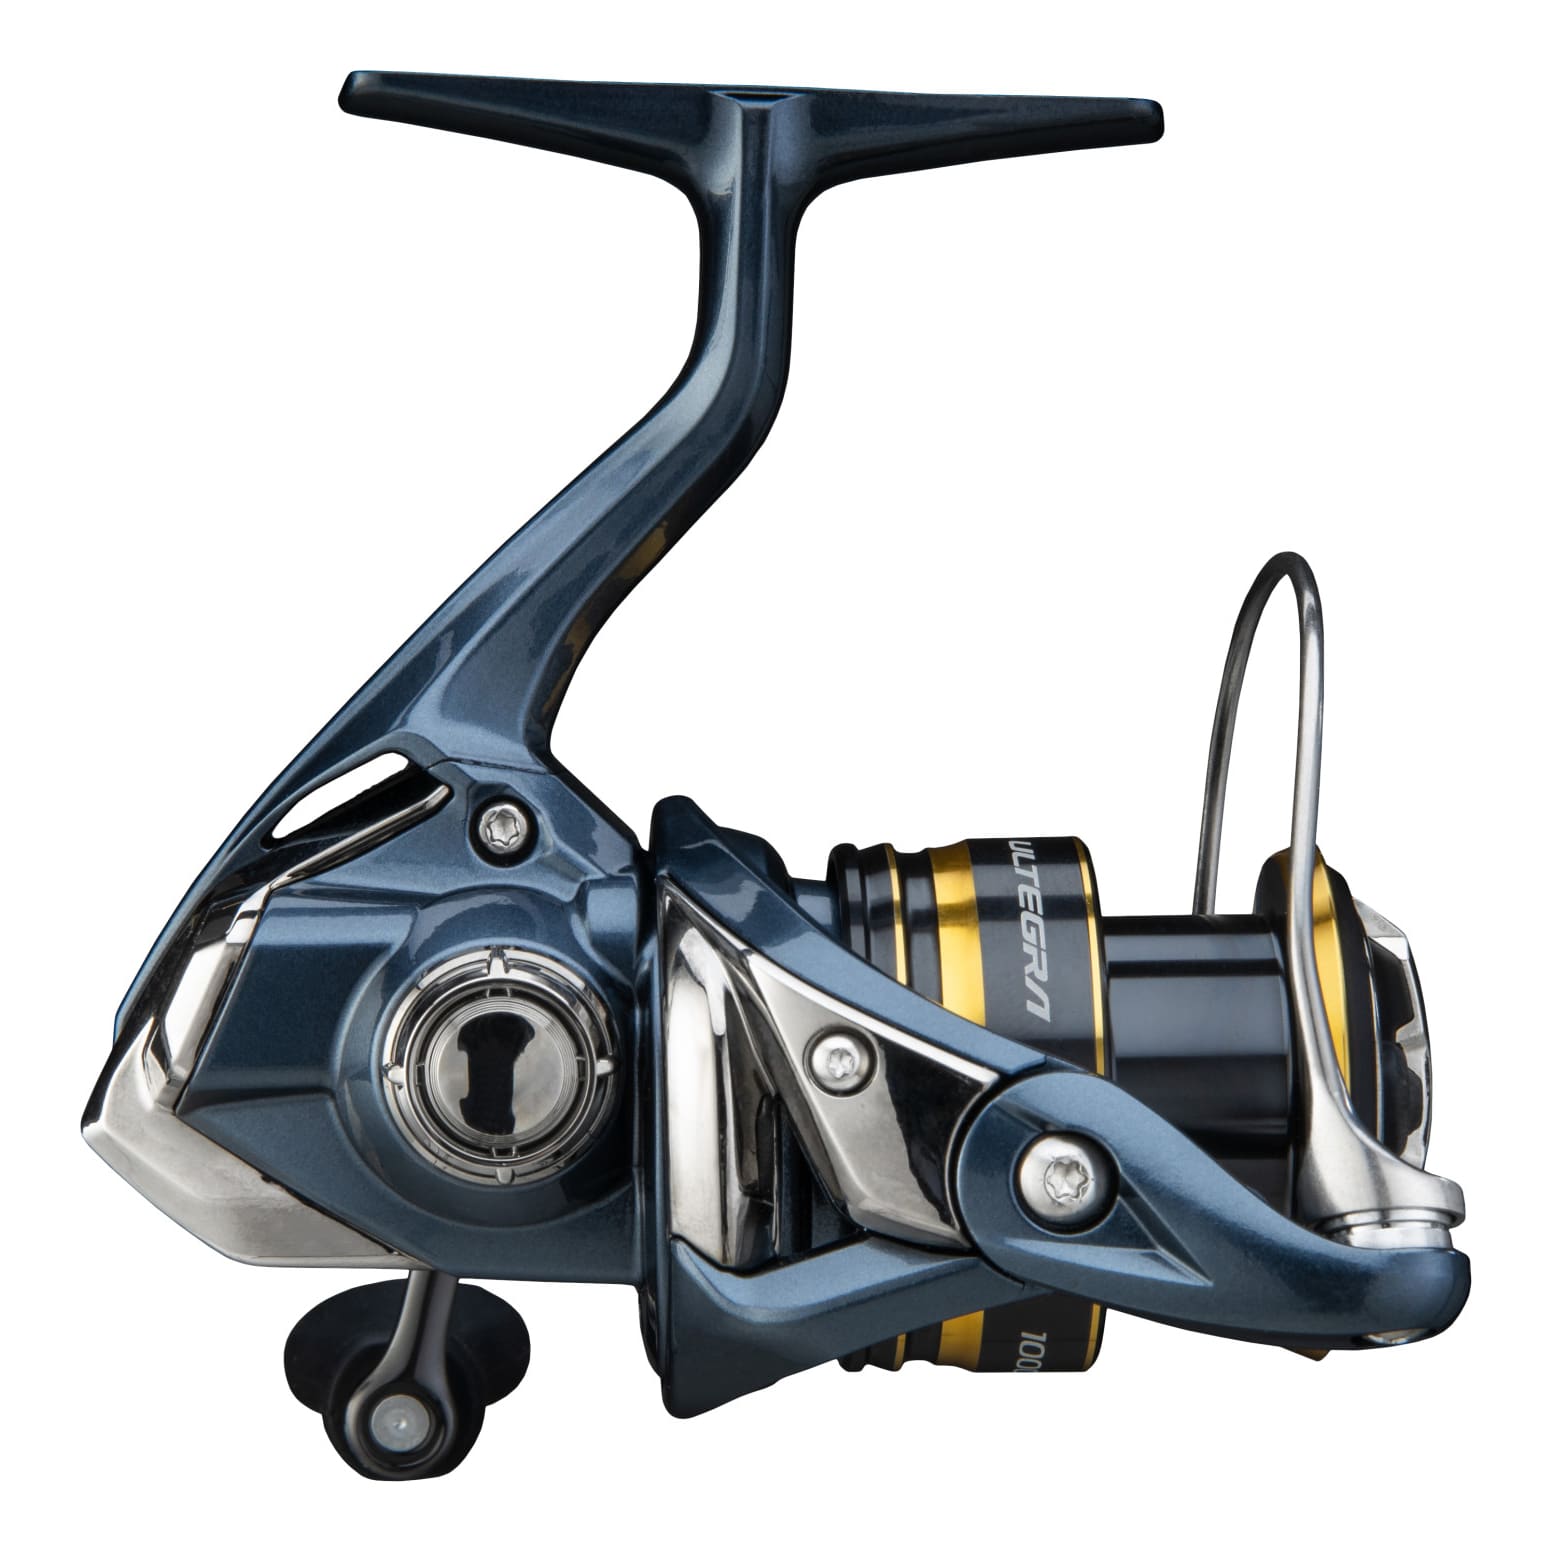 Shimano Ultegra 1000 FB Shimano Ultegra Freshwater Spinning Fishing Reel -  Multicolor, One size : Buy Online at Best Price in KSA - Souq is now  : Sporting Goods